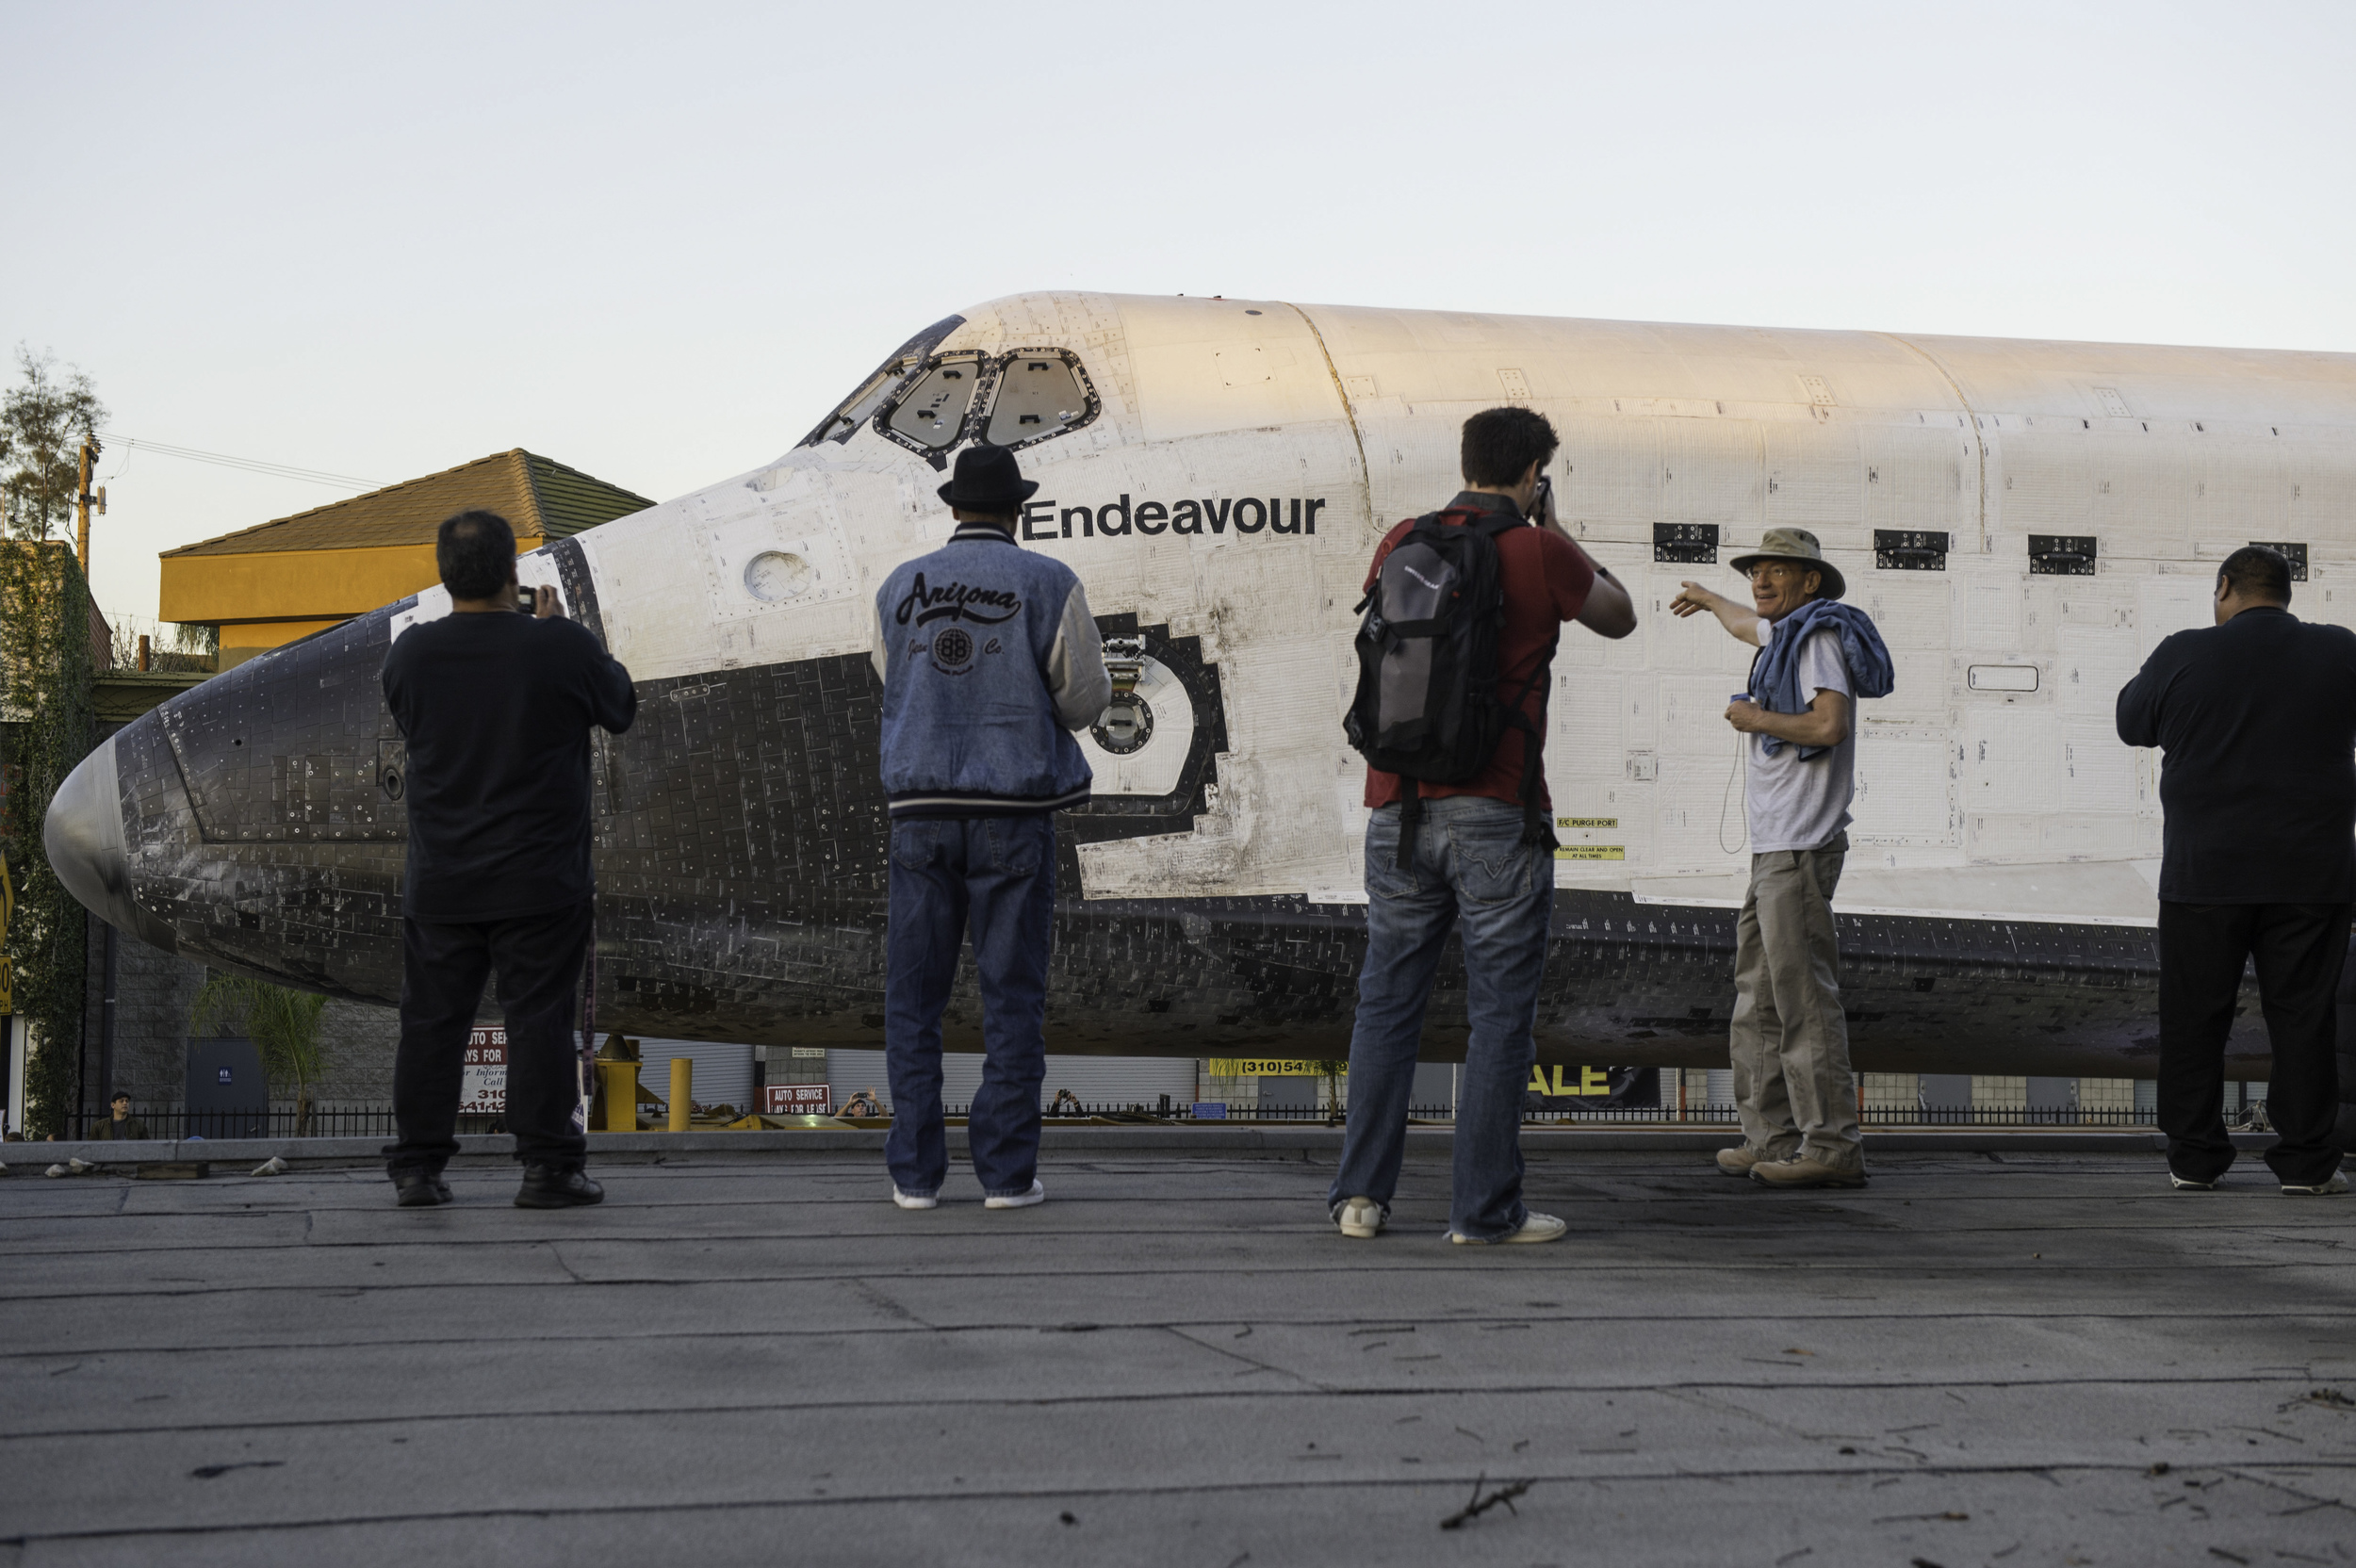  Spectators are seen as they watch space shuttle Endeavour traverse to its new home at the California Science Center in Los Angeles, Saturday, Oct. 13, 2012. Endeavour, built as a replacement for space shuttle Challenger, completed 25 missions, spent